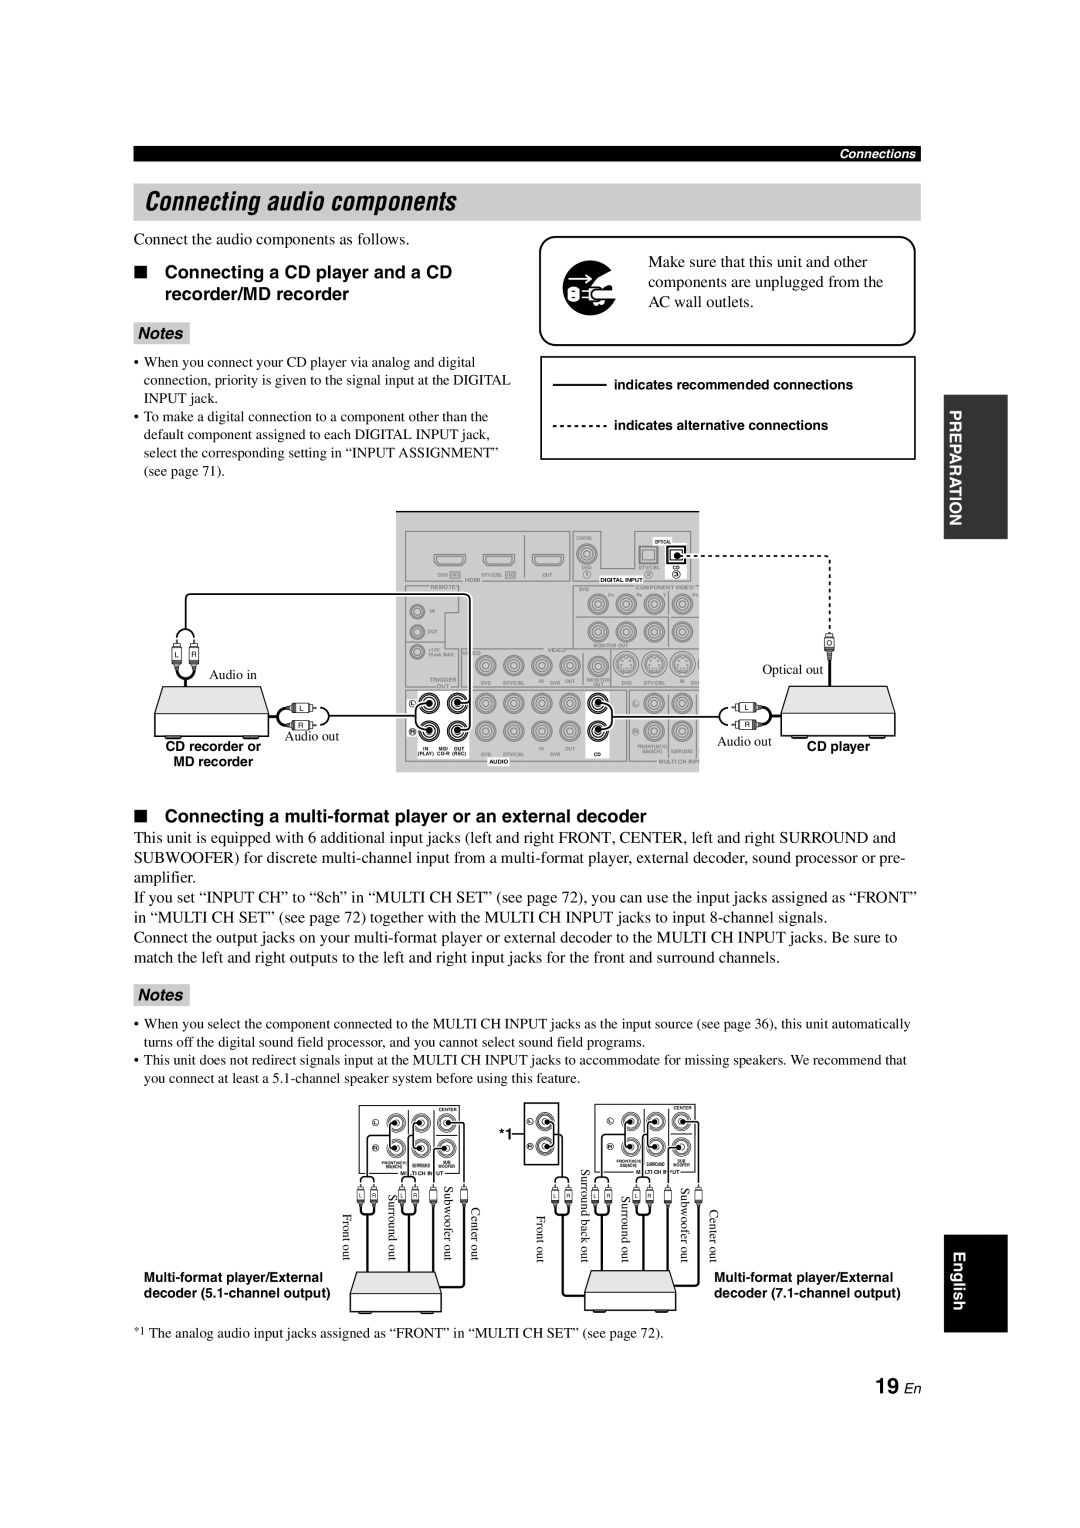 Yamaha HTR-6150 owner manual Connecting audio components, 19 En 